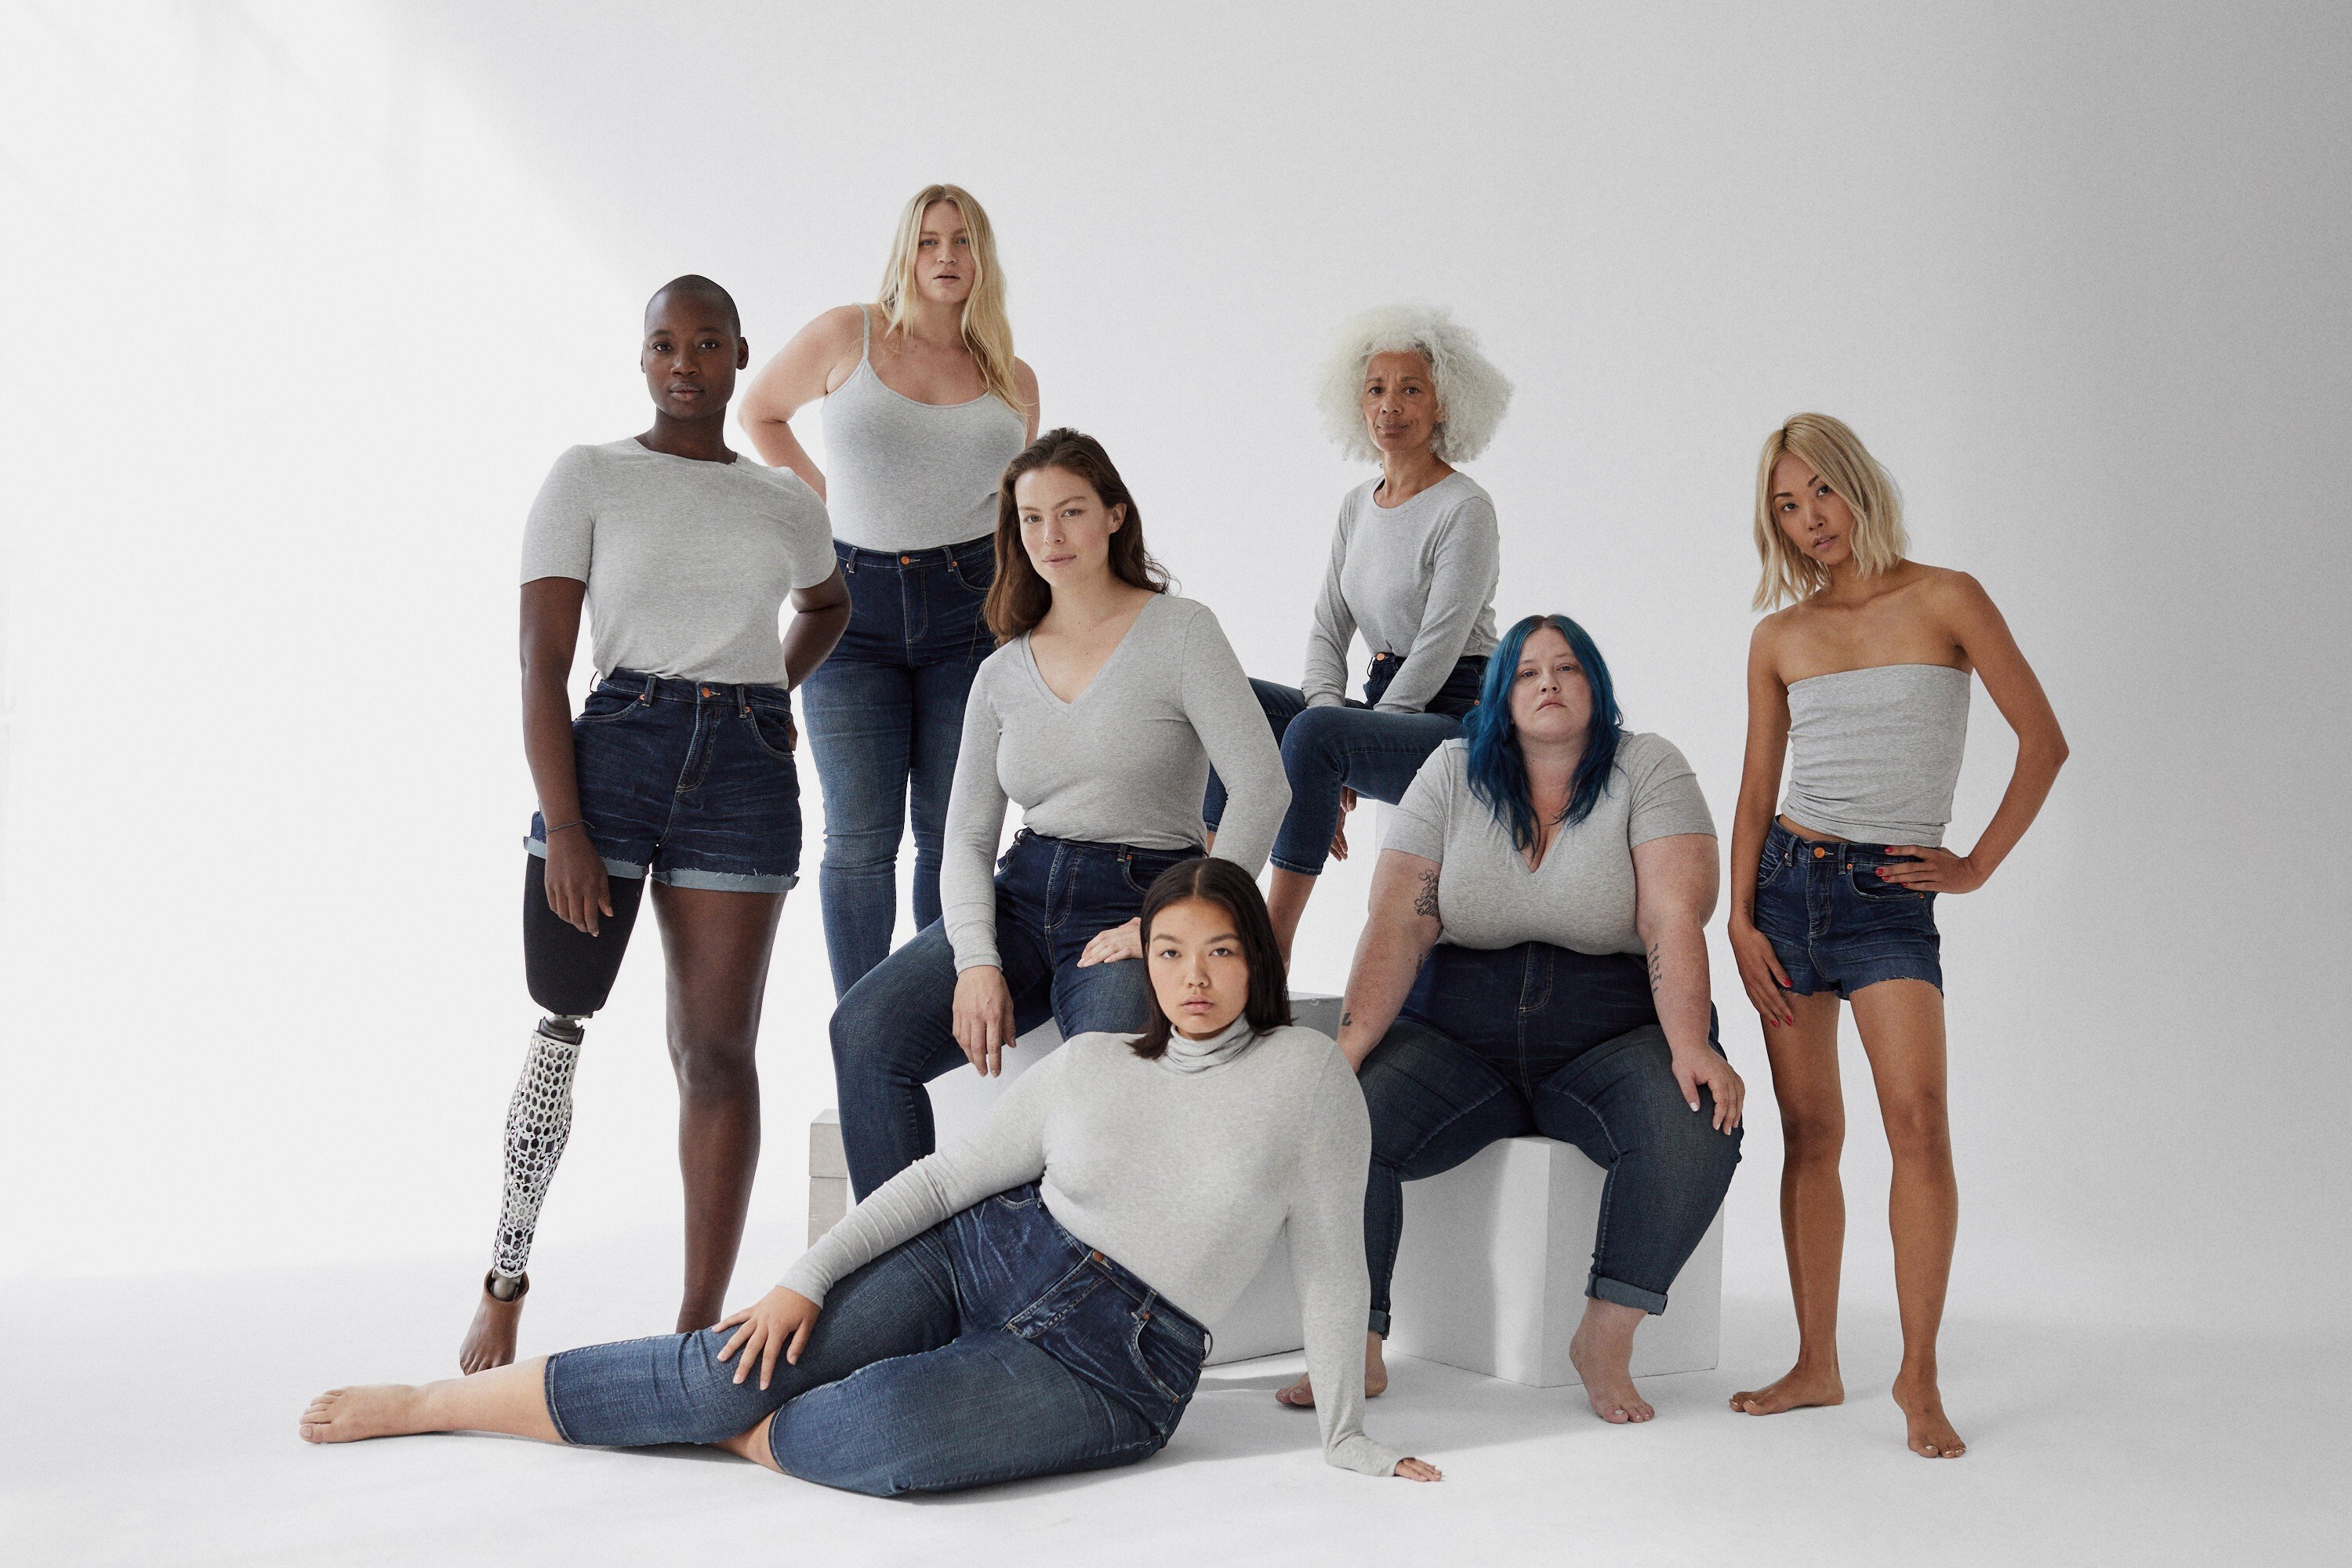 cool plus size brands